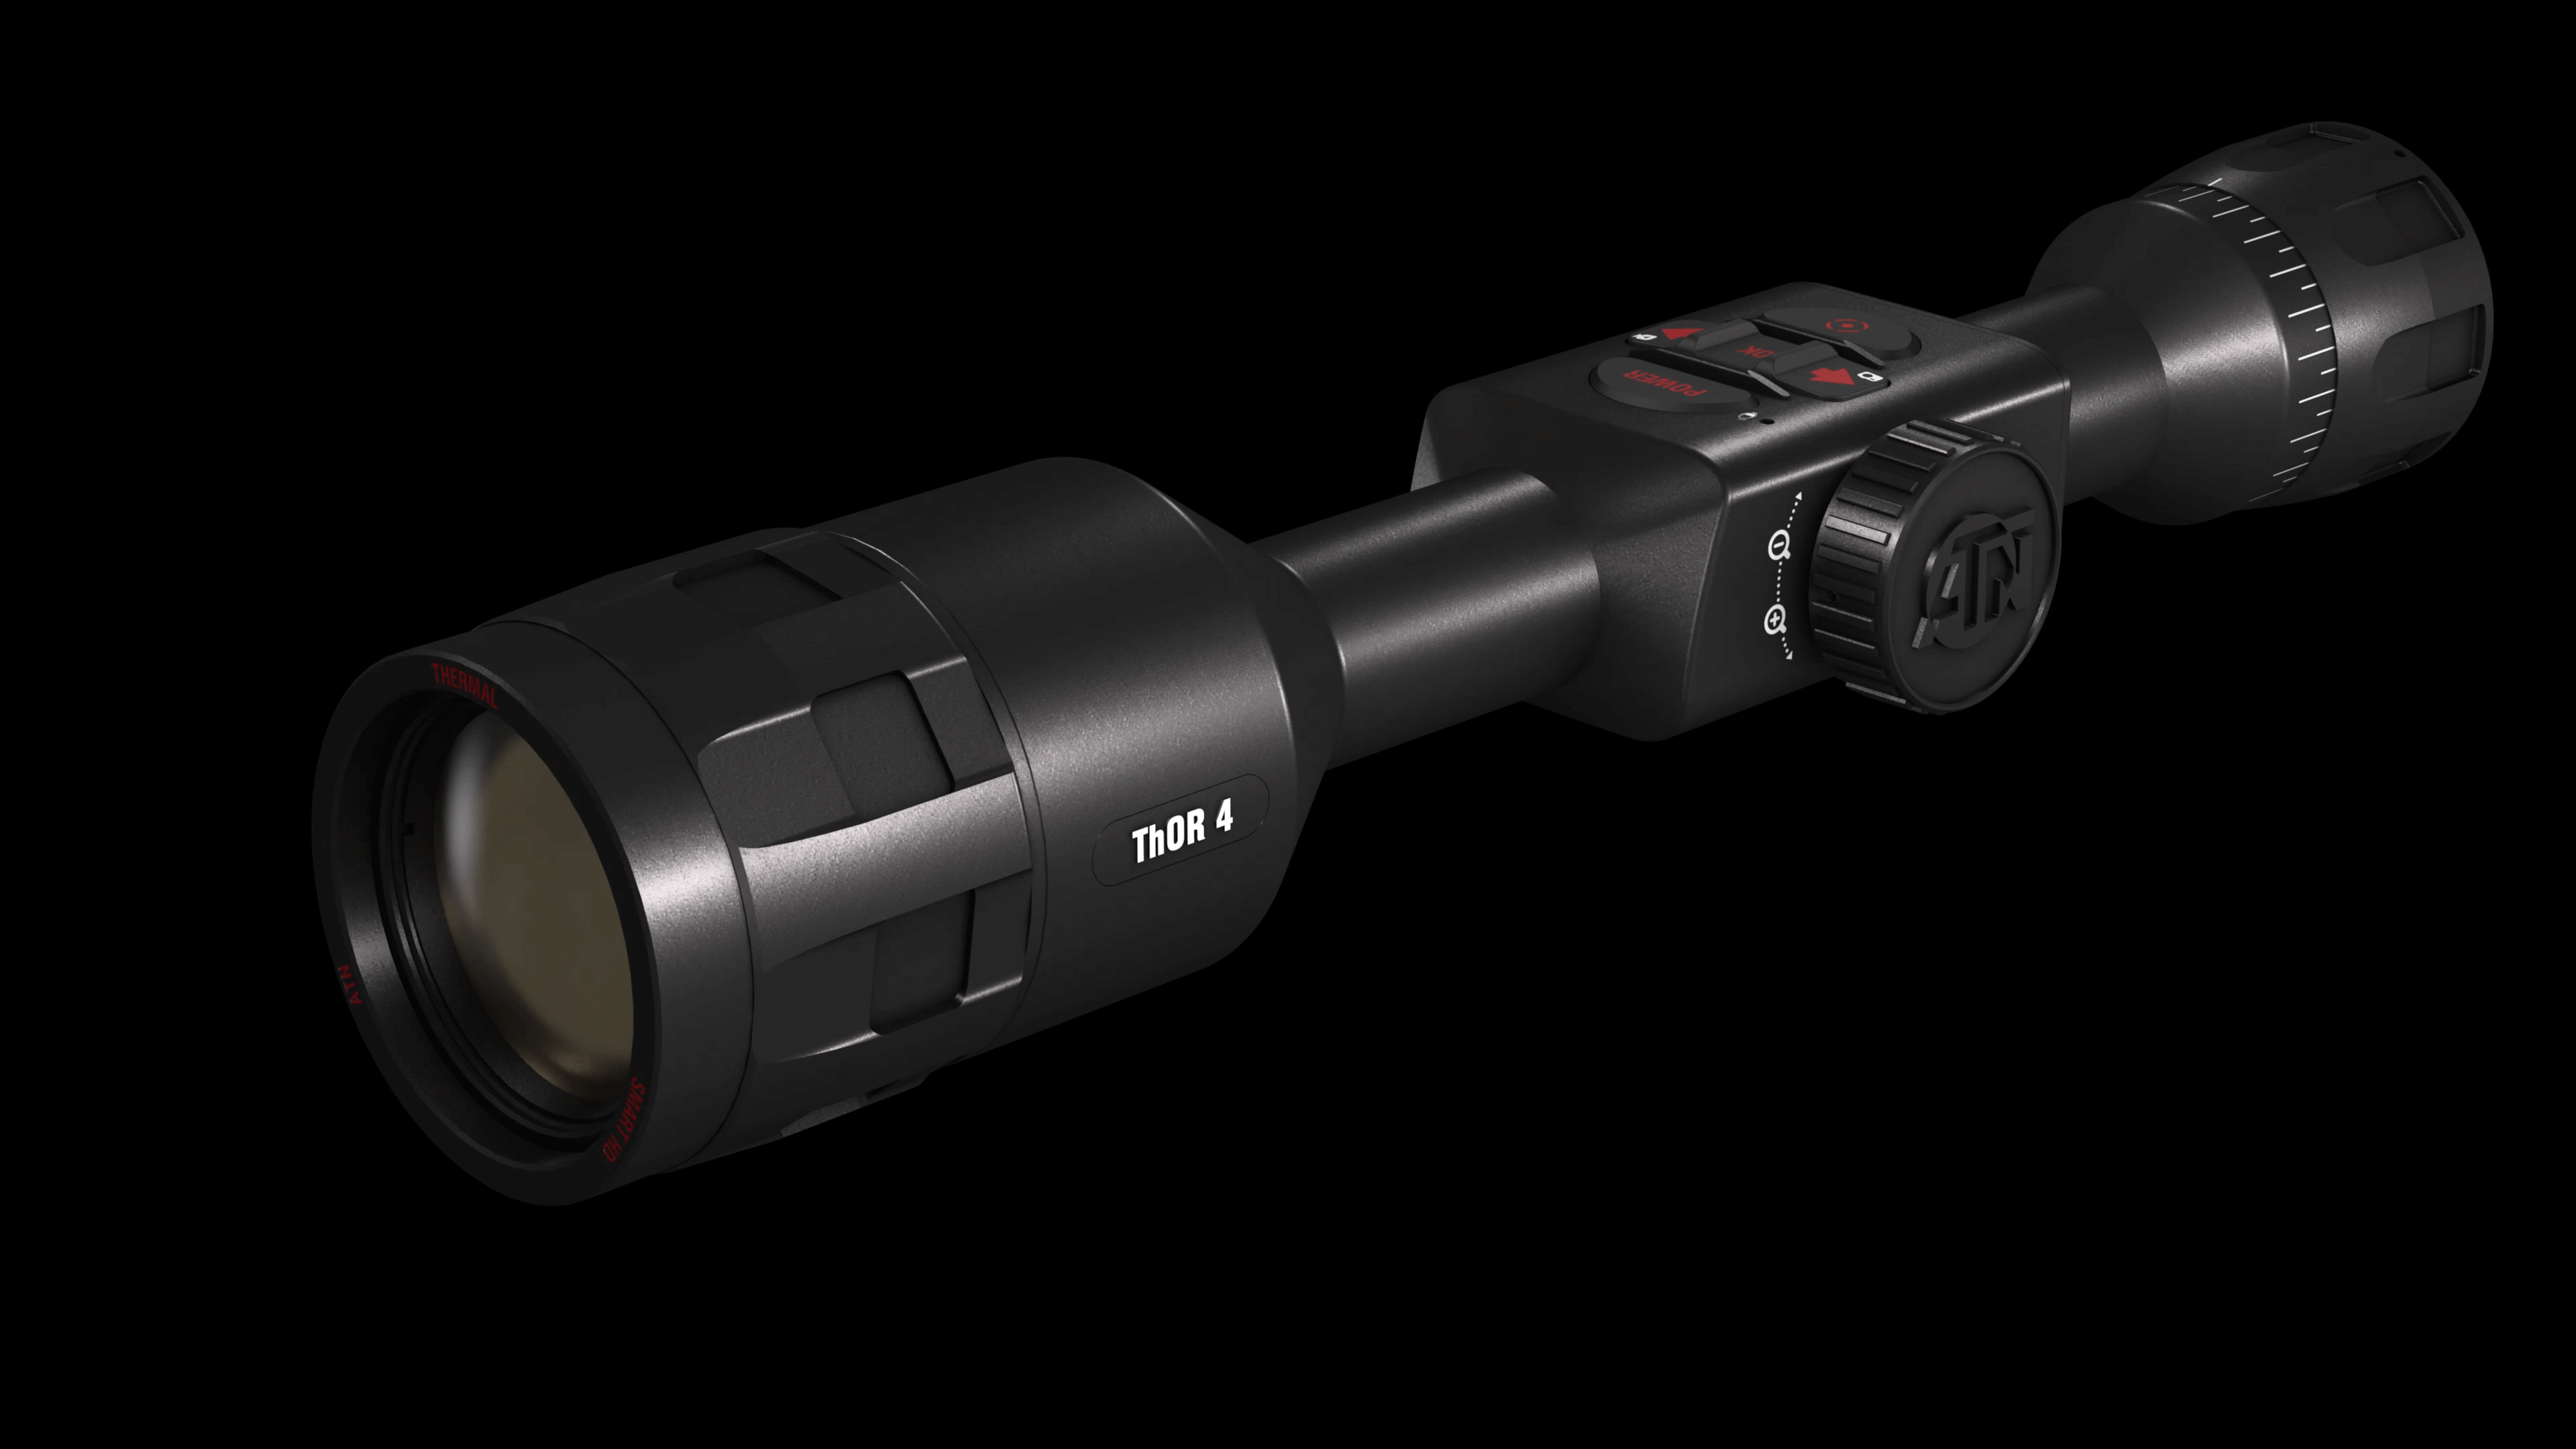 ATN ThOR 4 384 4.5-18x Smart HD Thermal Rifle Scope for Sale